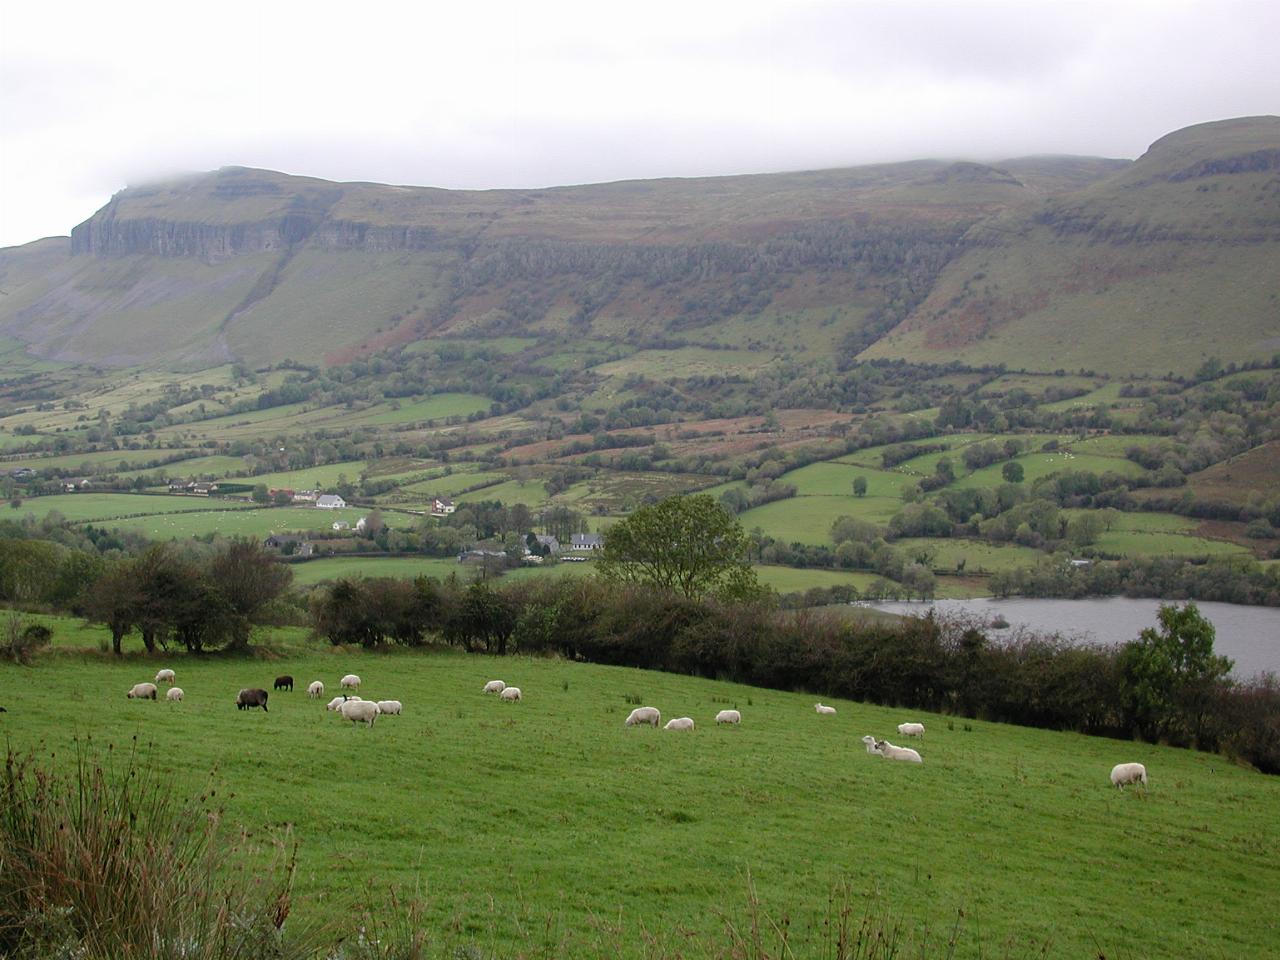 Drumcliff River Valley & Glencar Lake just east of Sligo, Eire and Benbullen - the mountain at the far left end